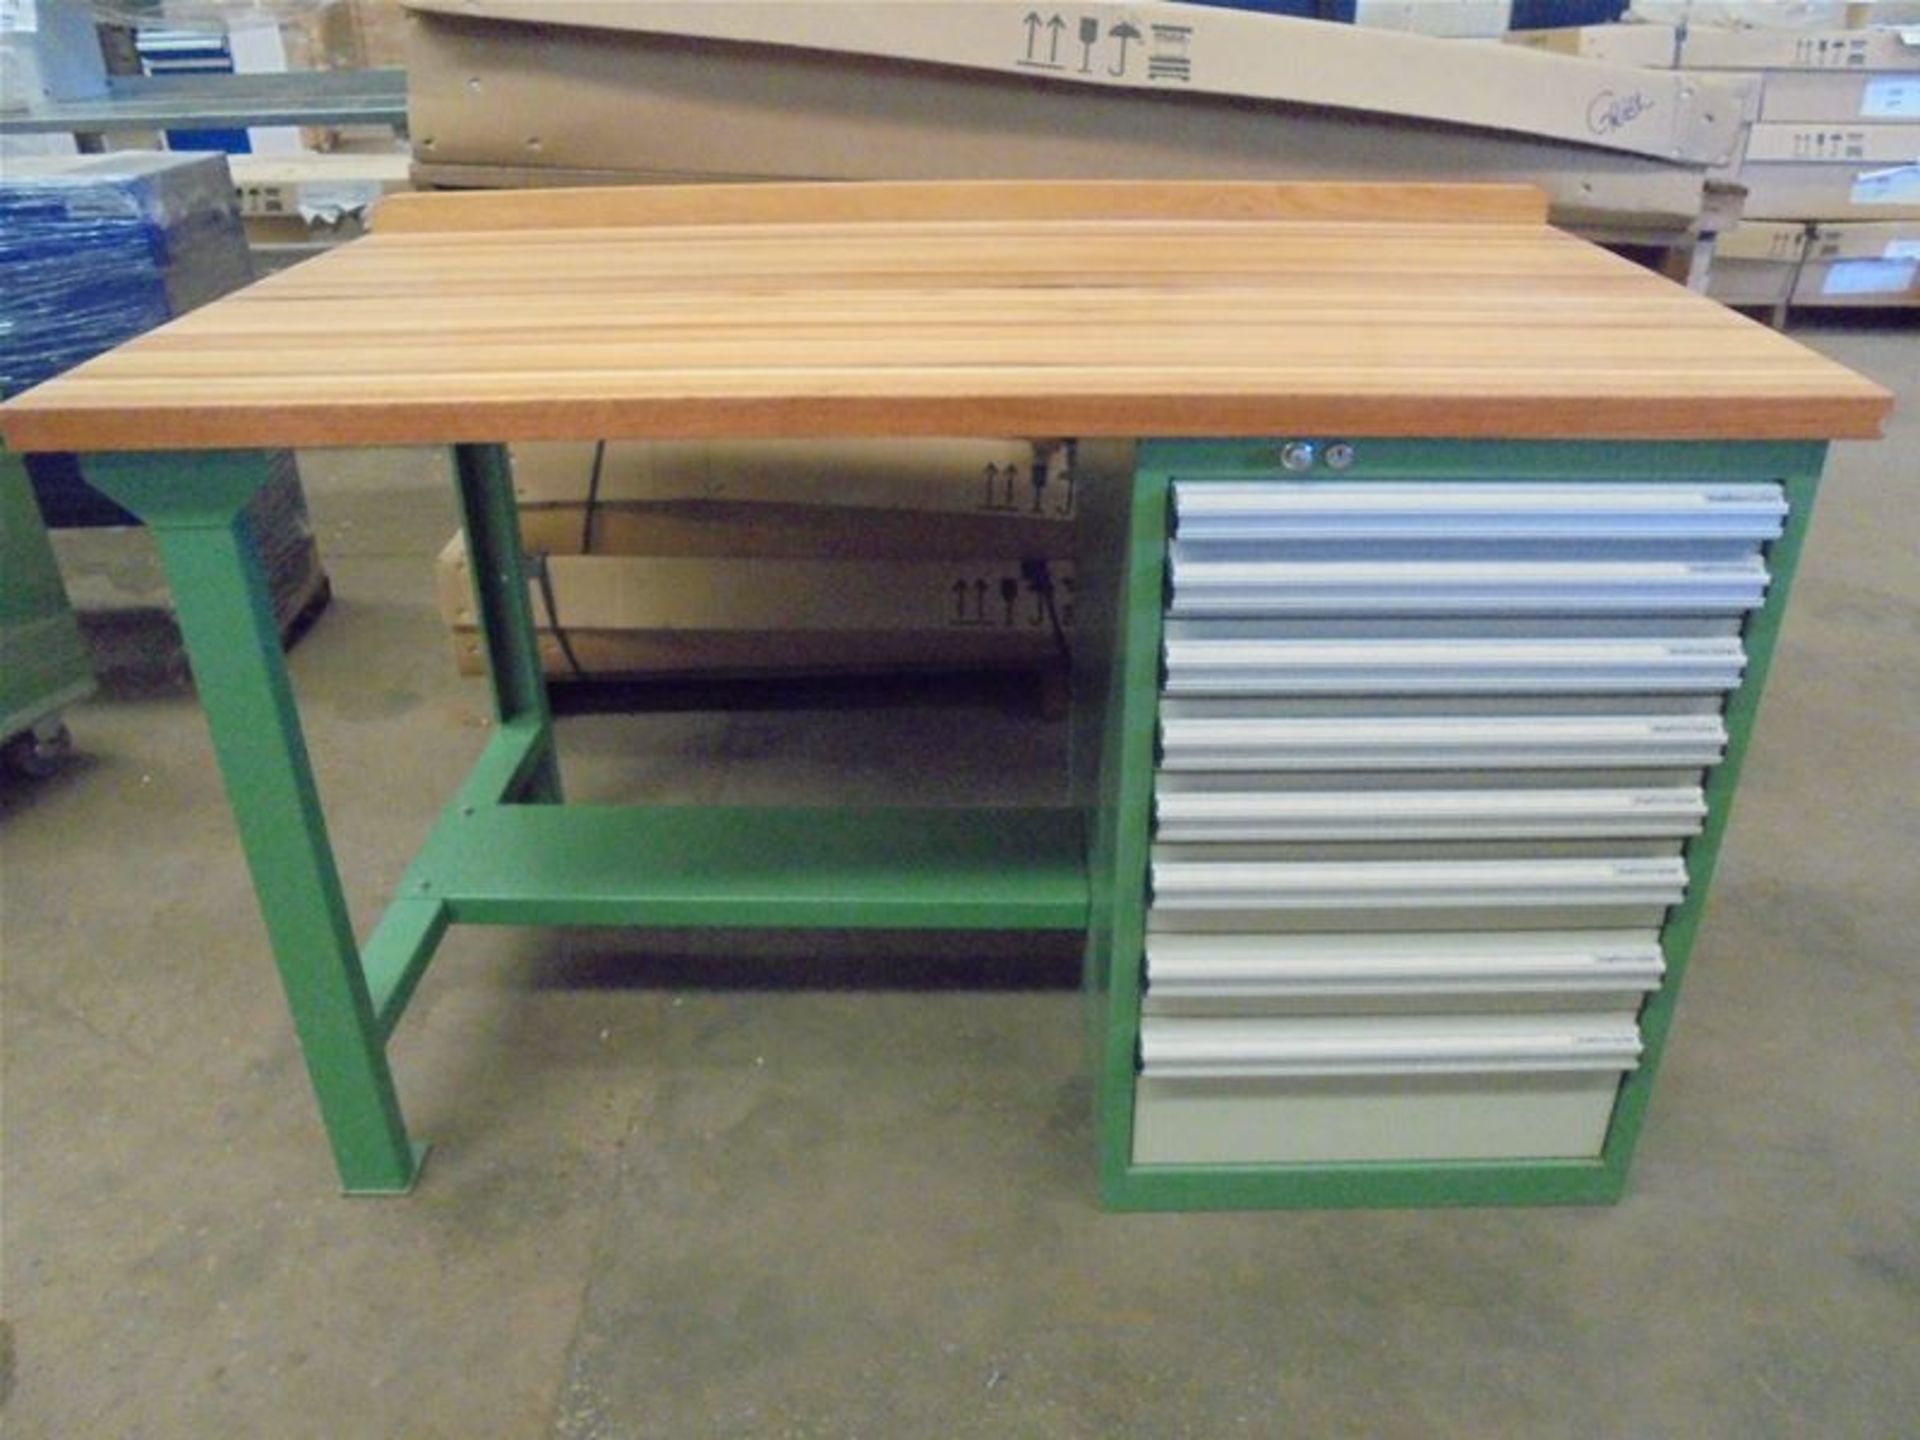 Workbench WKS 500-15T with Saligna Top and C850-8.1 Cabinet Drawer